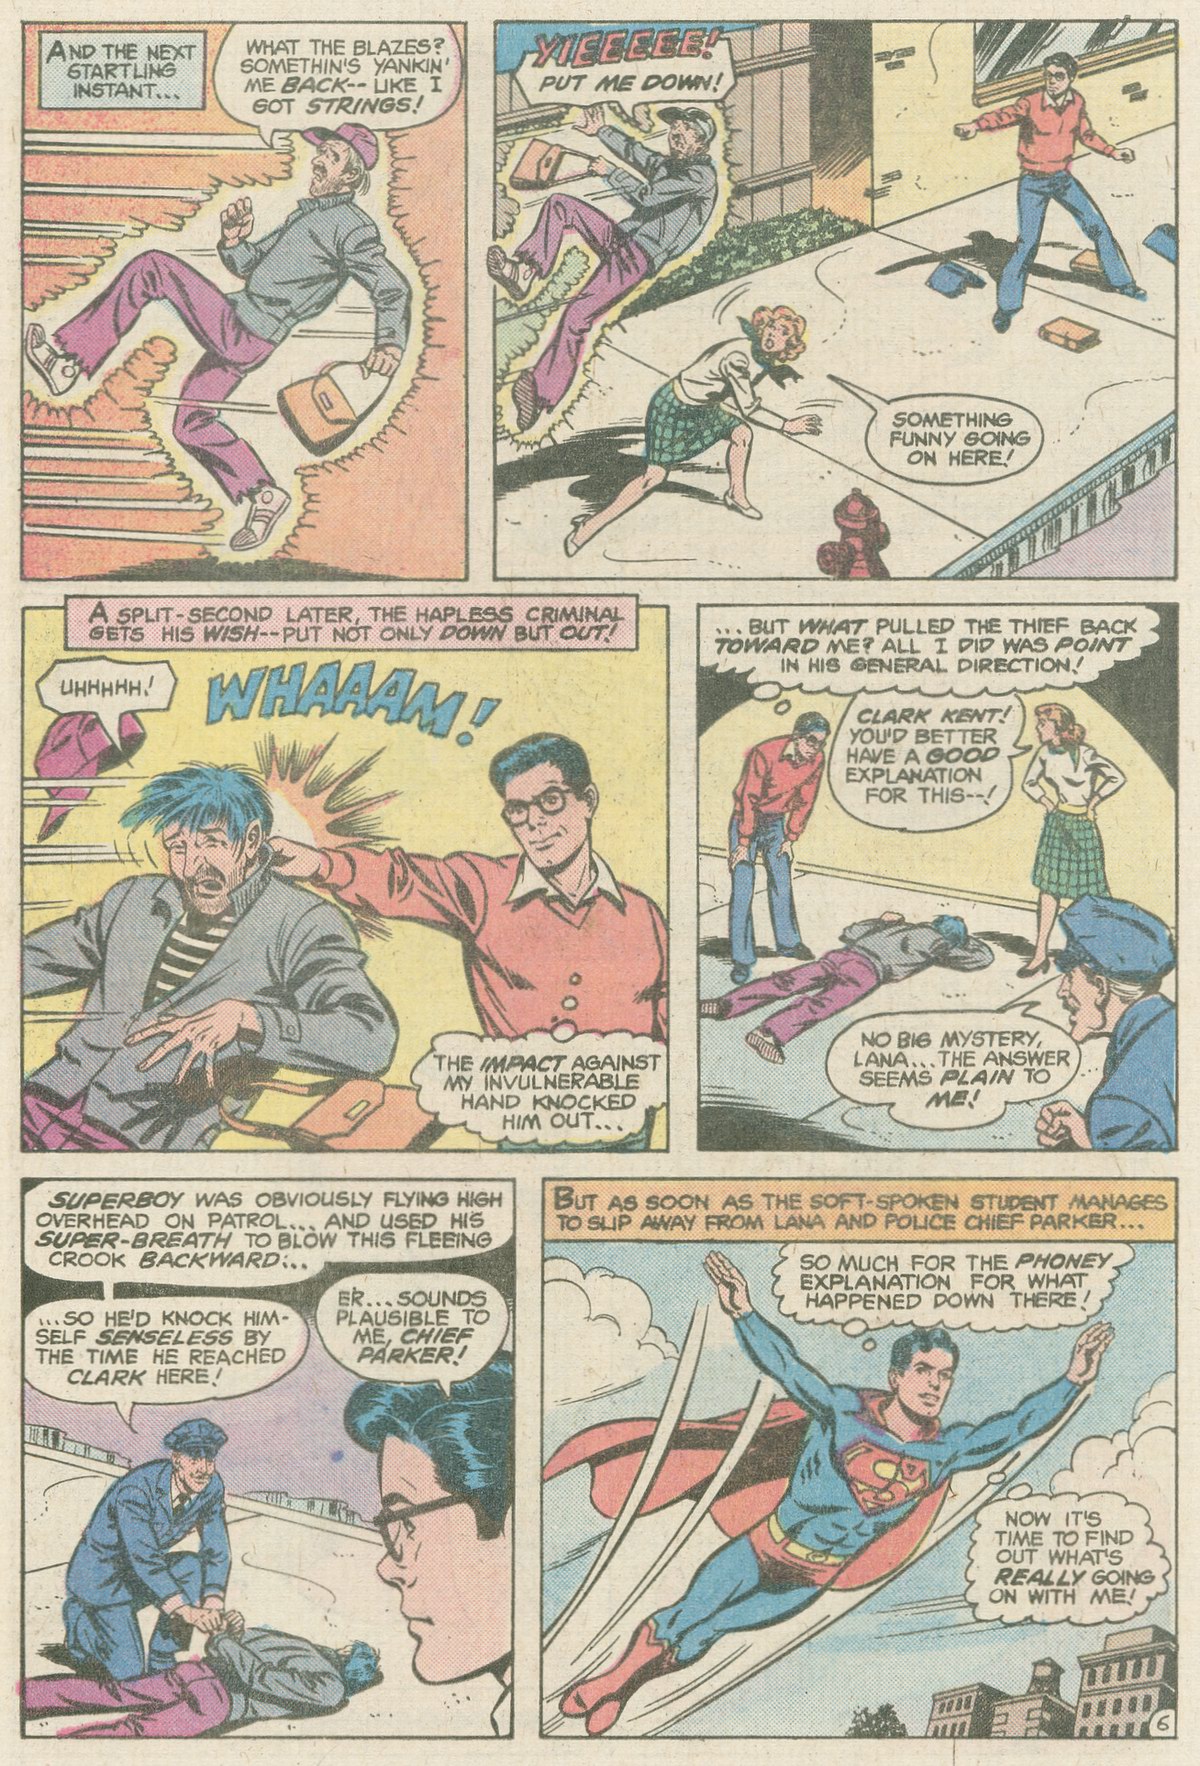 The New Adventures of Superboy 11 Page 6